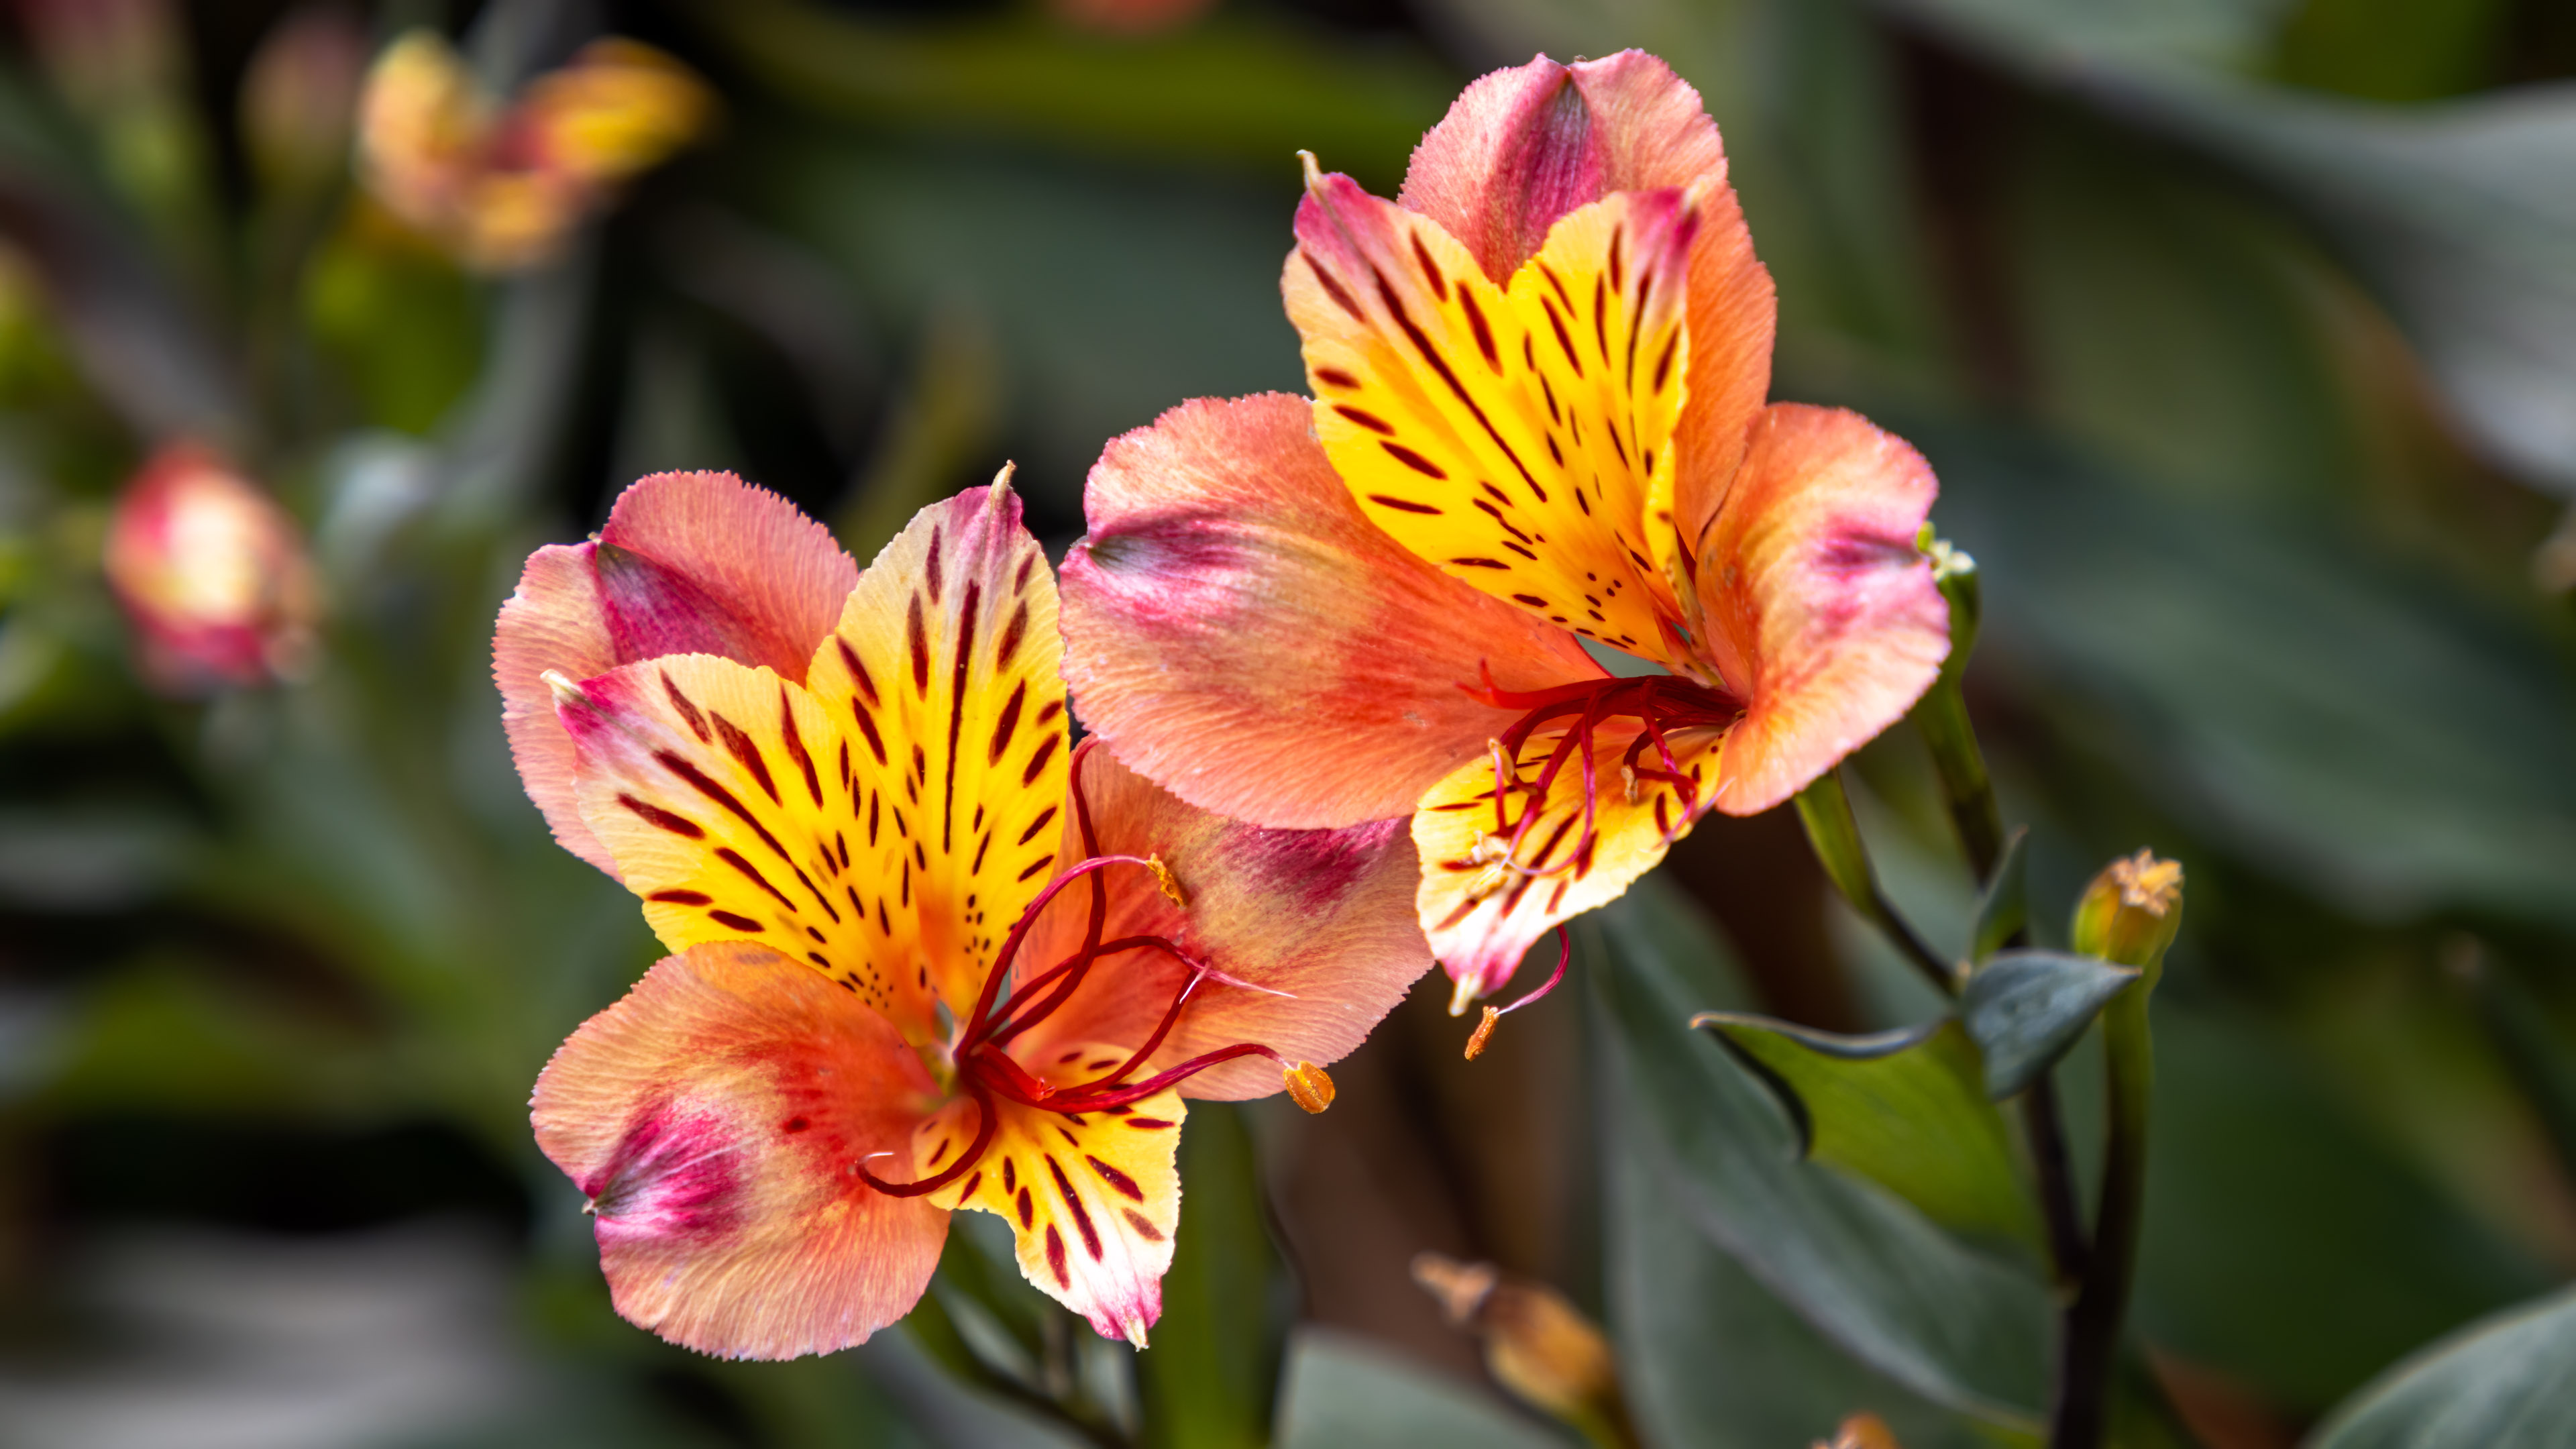 Experience the brilliance of 4K resolution with our stunning red and yellow flower wallpaper for PC.